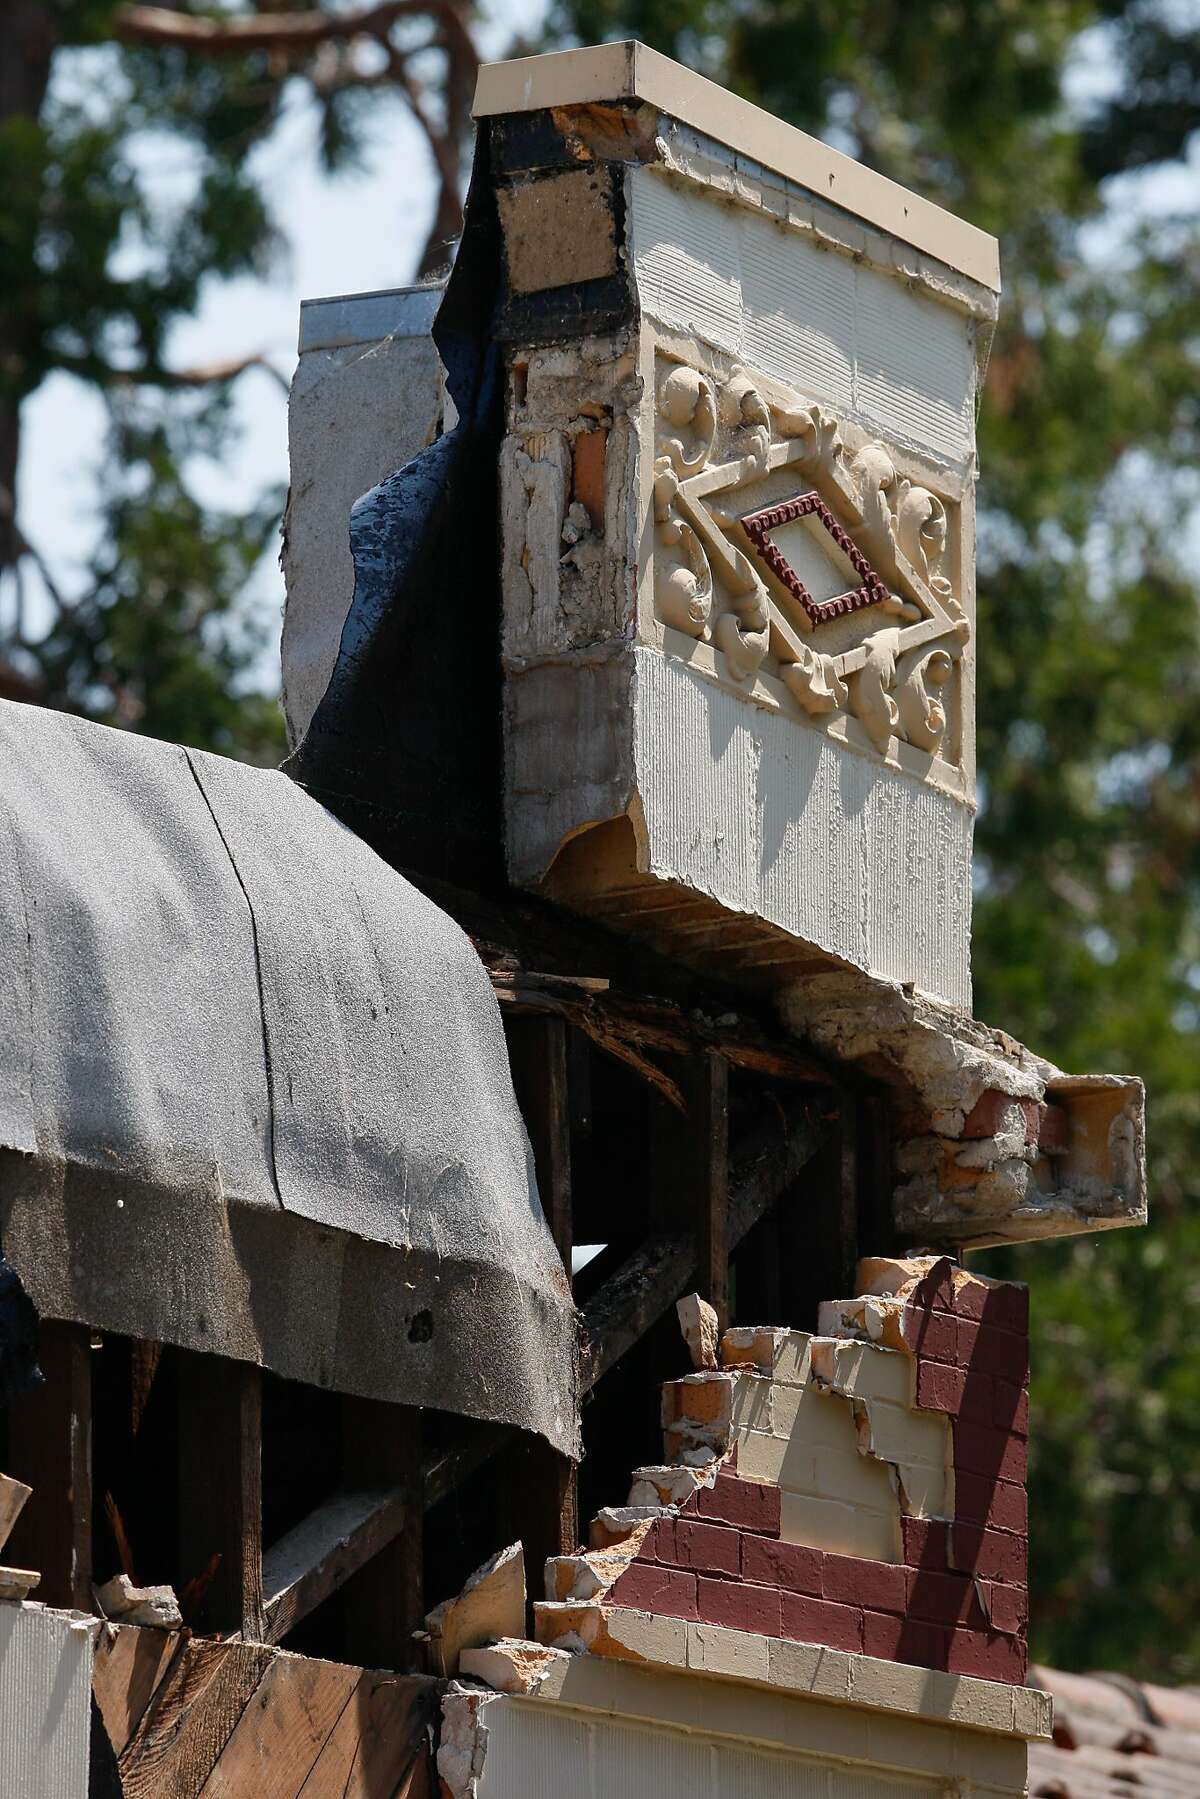 heavy damage is seen on 587 Jefferson Street after yesterday morning's earthquake on August 25, 2014 in Napa, CA.